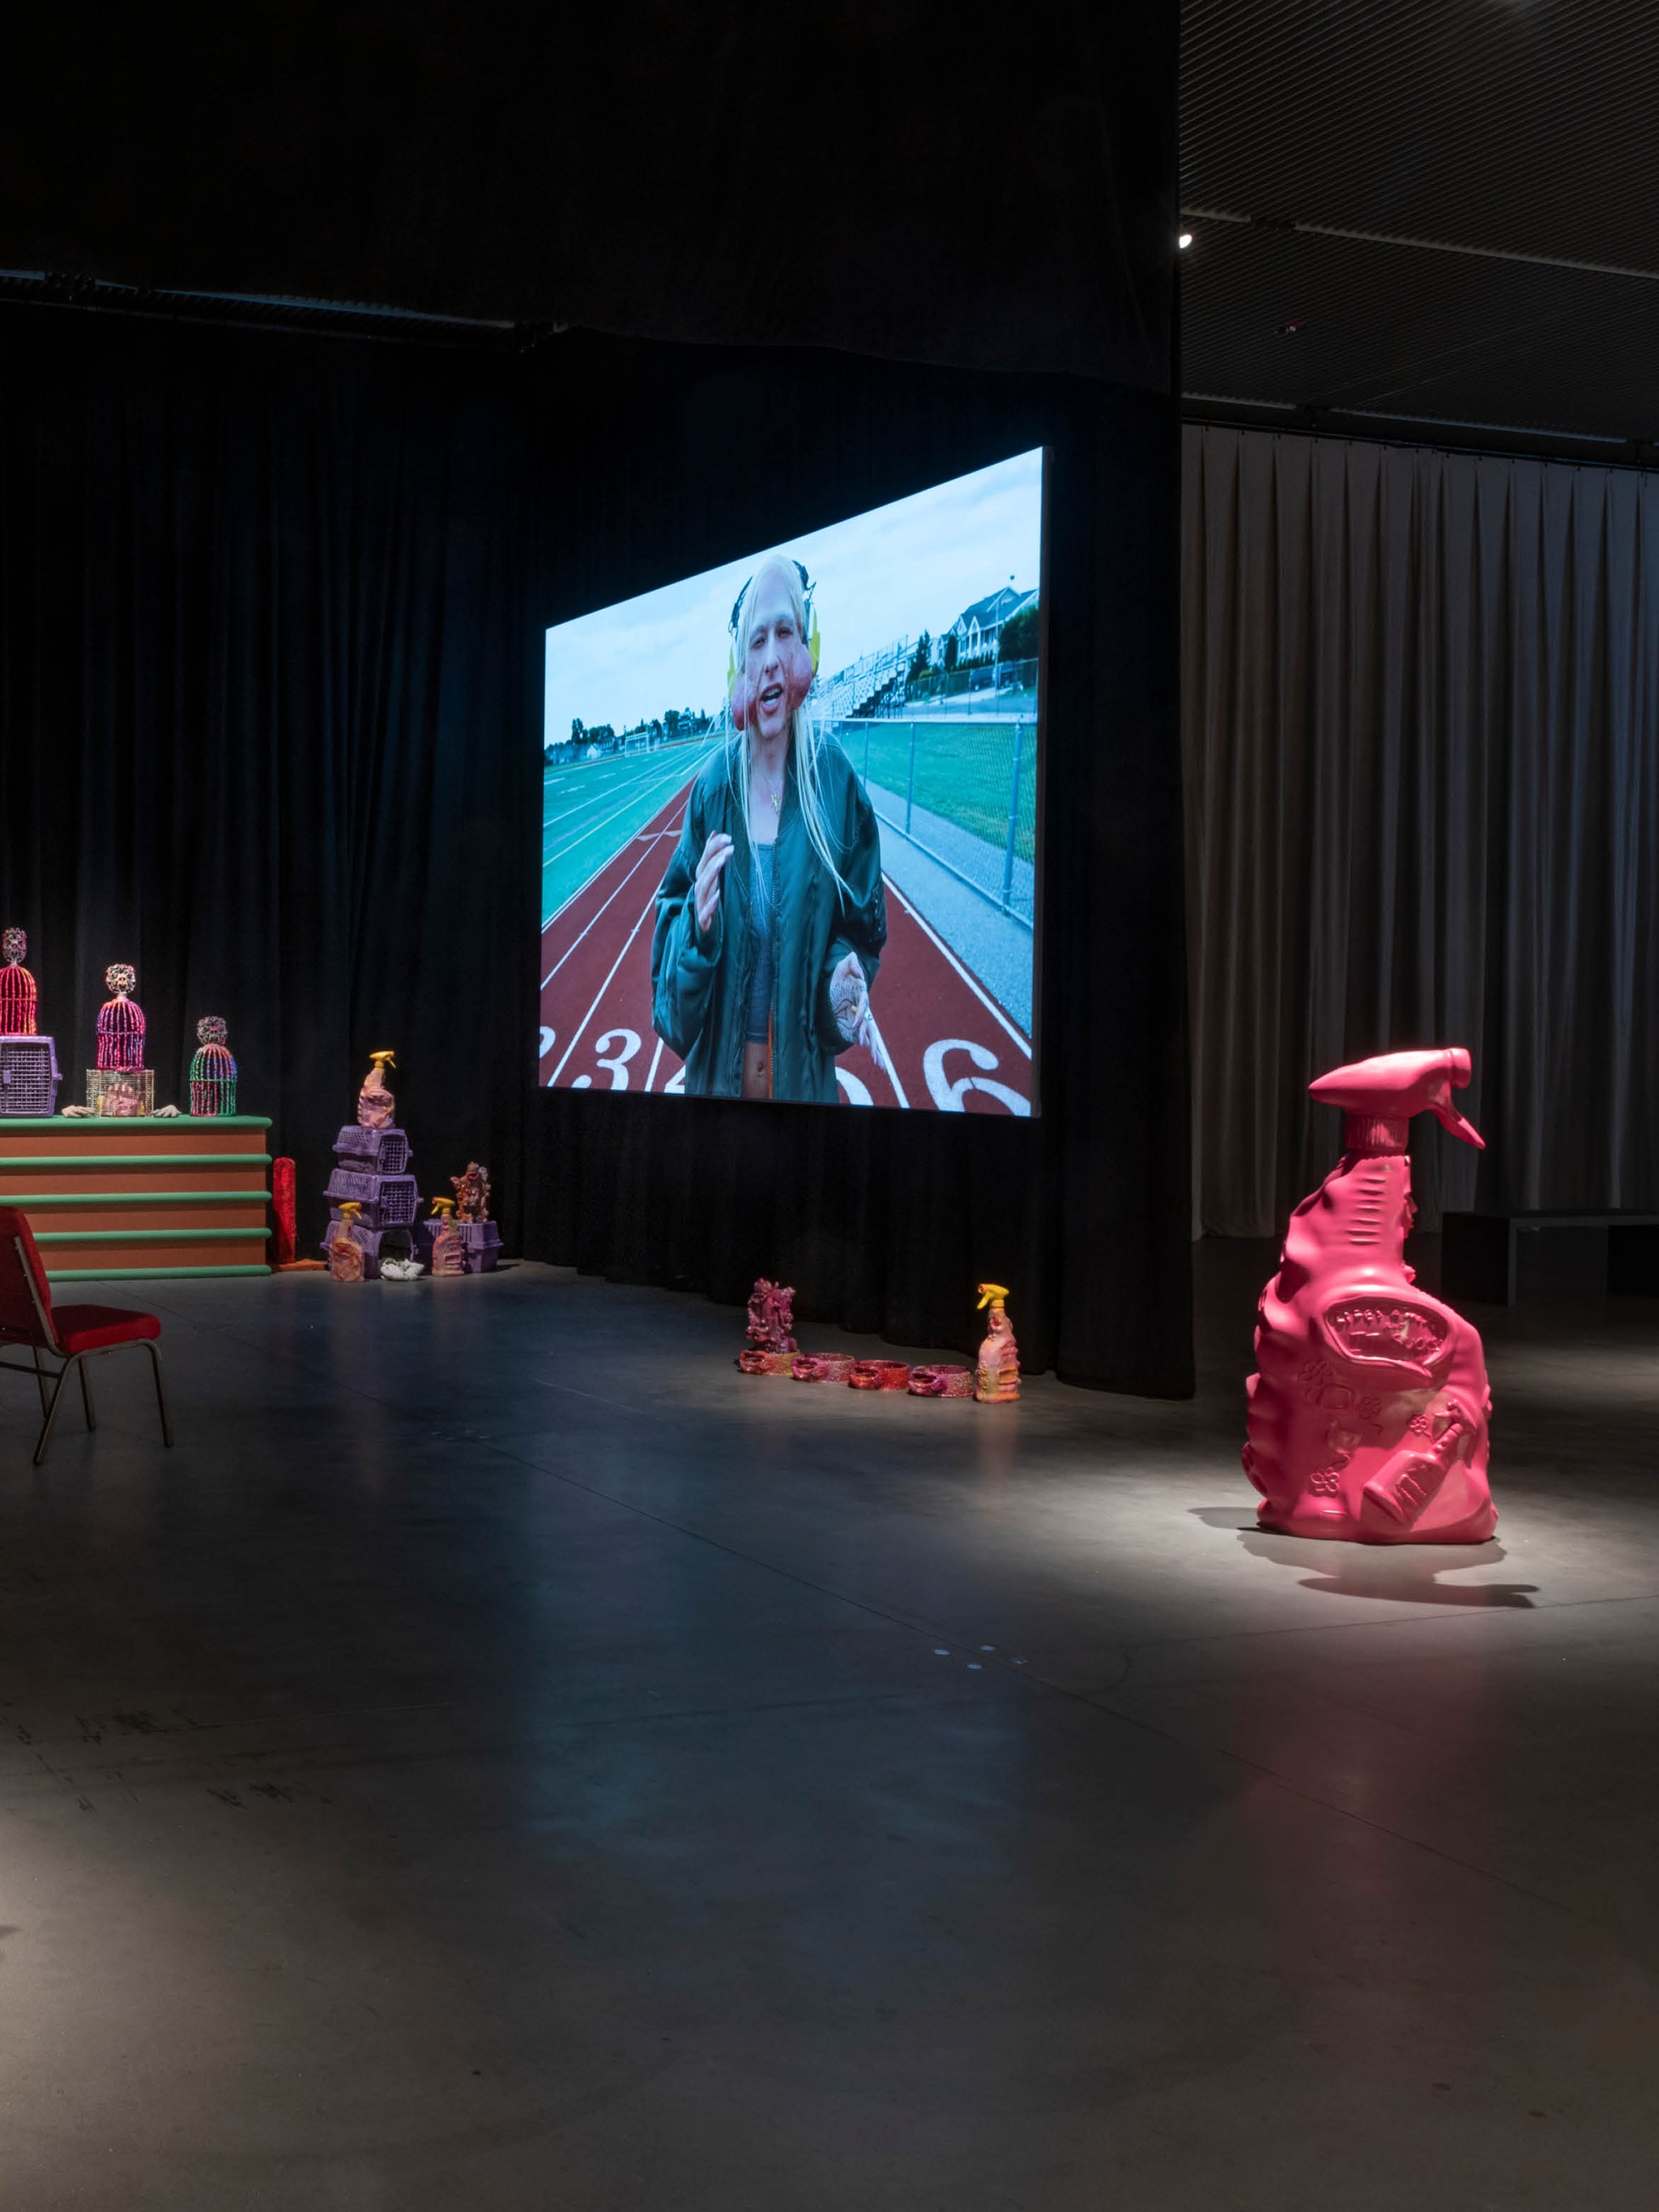 An installation of sculptural objects and a film in a gallery with low light. The sculptural objects are oversized versions of pet products, like cages, dog bowls, and cleaning supplies. They are cast in fluorescent colors. In the foreground is a large pink spray bottle sculpture, about four feet tall. In the background, the film projected on a screen shows the artist Jake Brush in character with a long blond wig and prosthetic jowls protruding from his cheeks while he walks on a high school track.